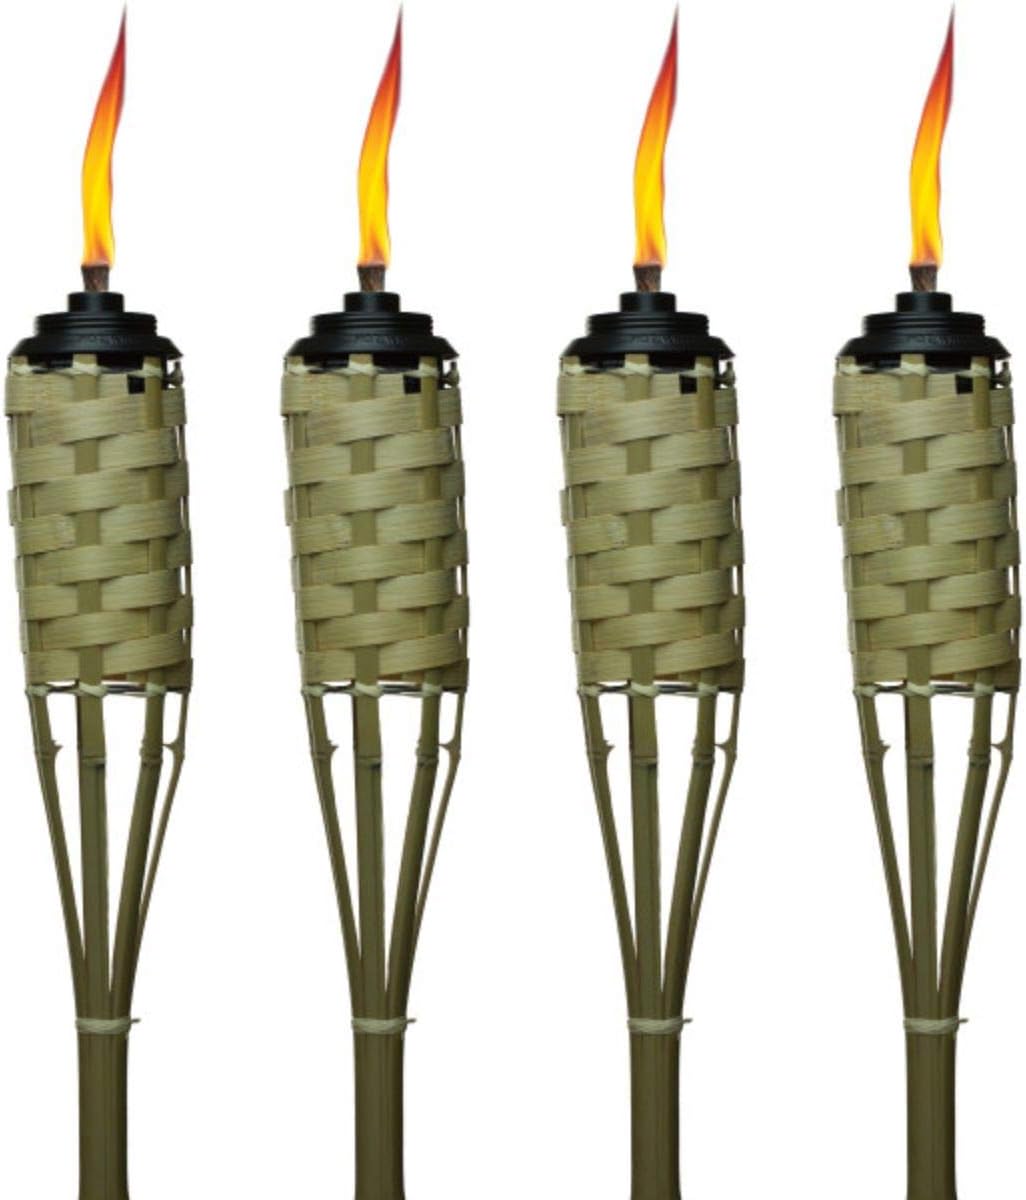 TIKI Brand 4-Pack Luau Bamboo Torches, Weather Resistant Coated Torch, Outdoor Dcor for Home, Garden, Patio, 57 Inch, Natural, 1117078,Beige